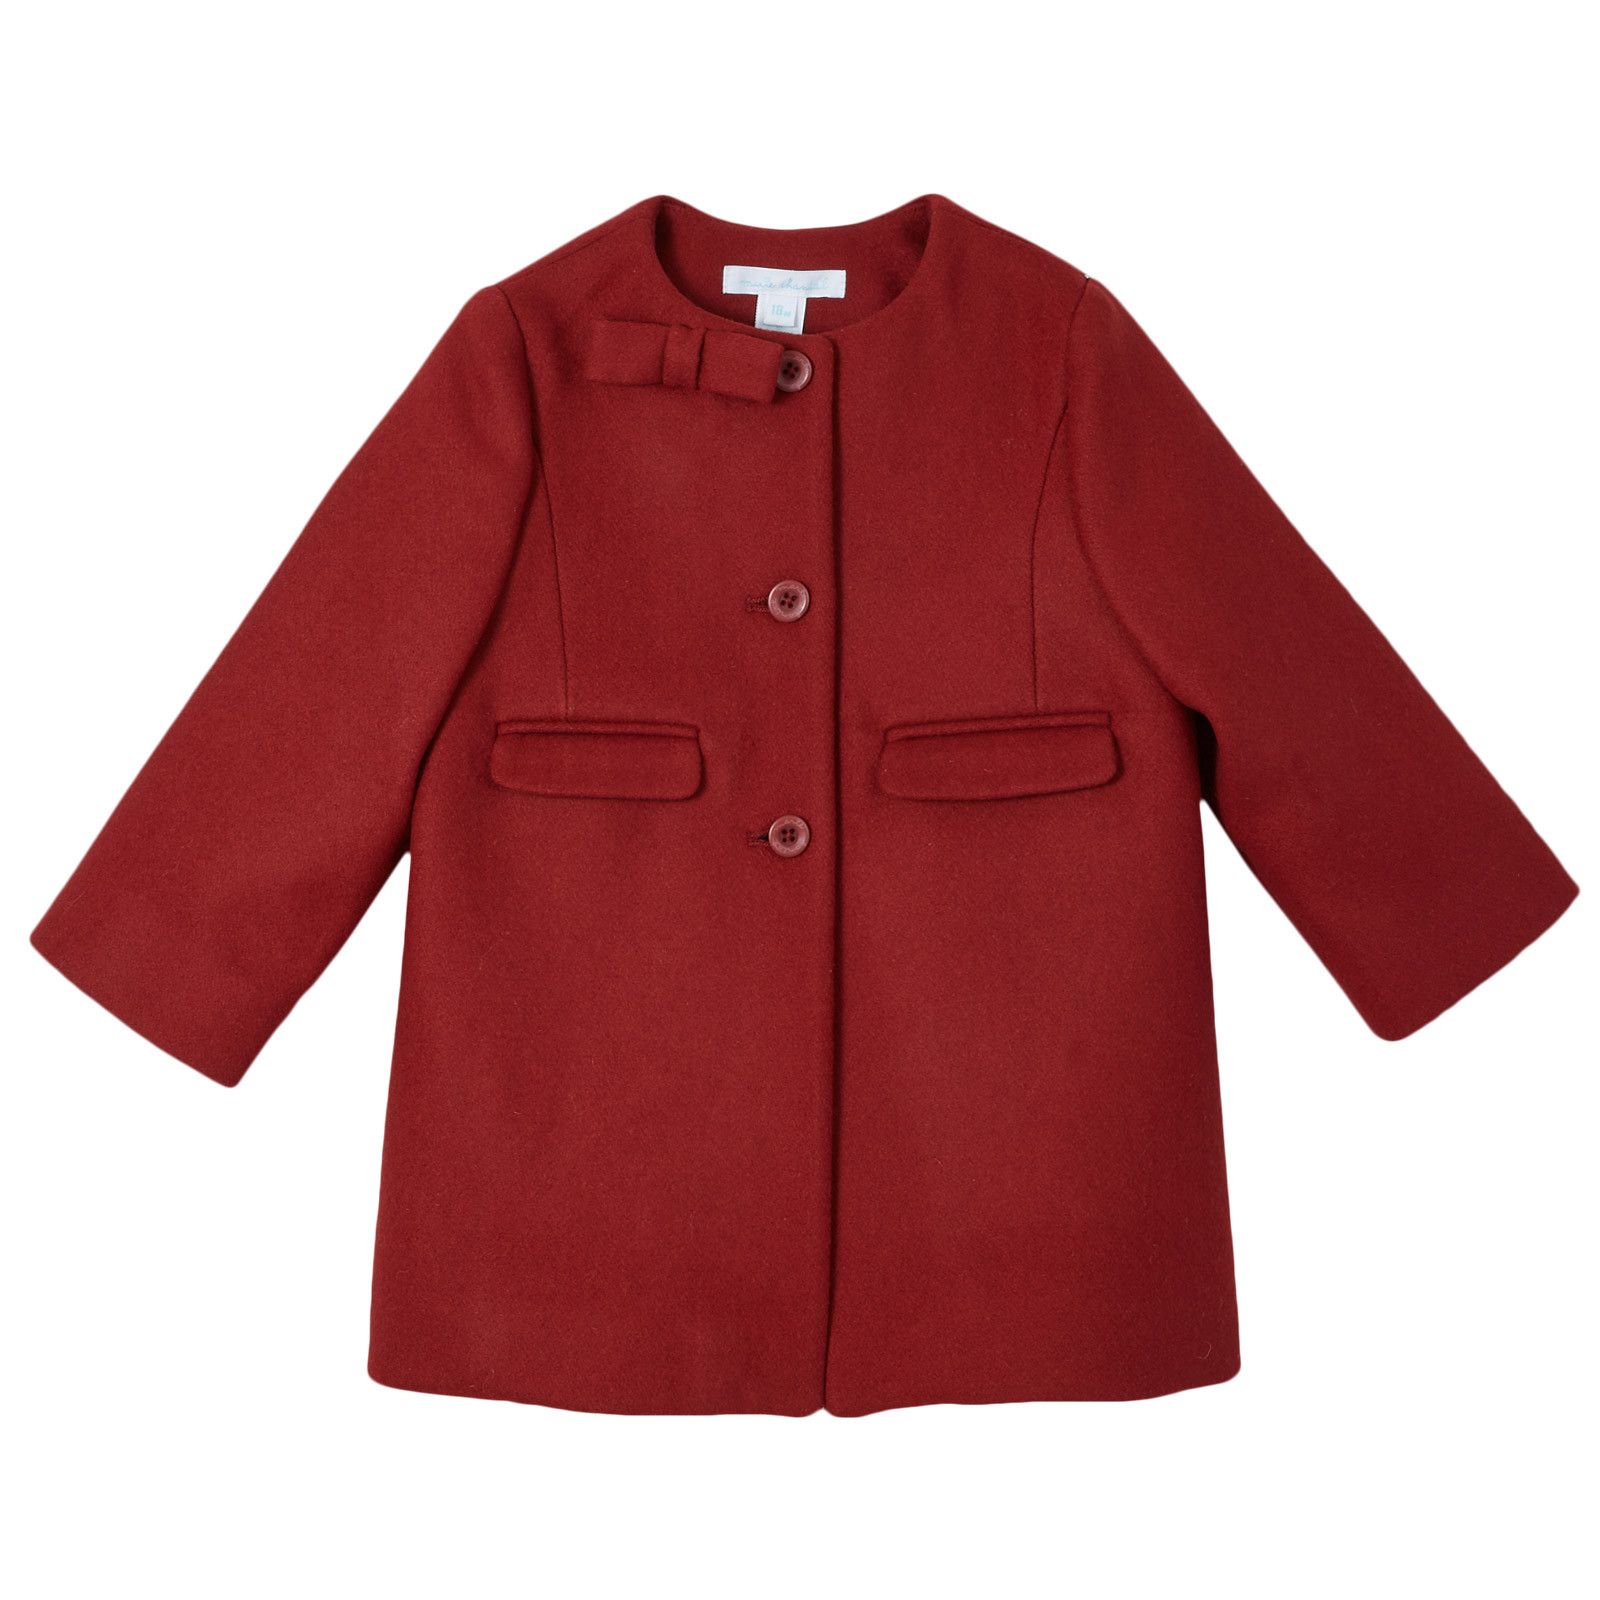 Baby Girls Red Wool Coat With Bow Trims - CÉMAROSE | Children's Fashion Store - 1